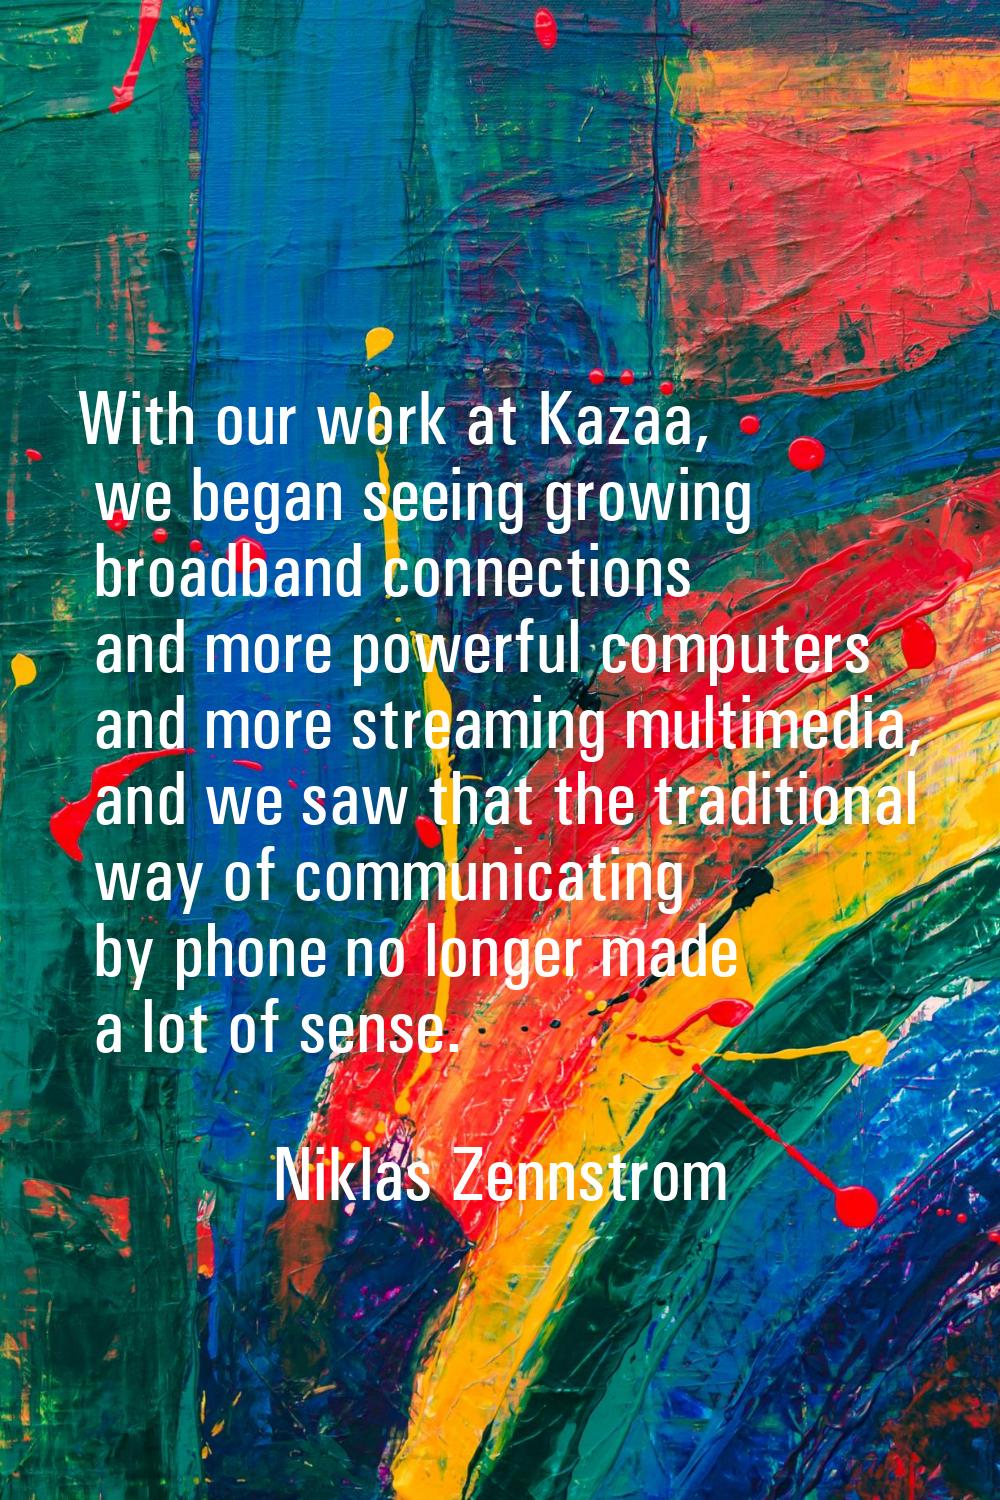 With our work at Kazaa, we began seeing growing broadband connections and more powerful computers a